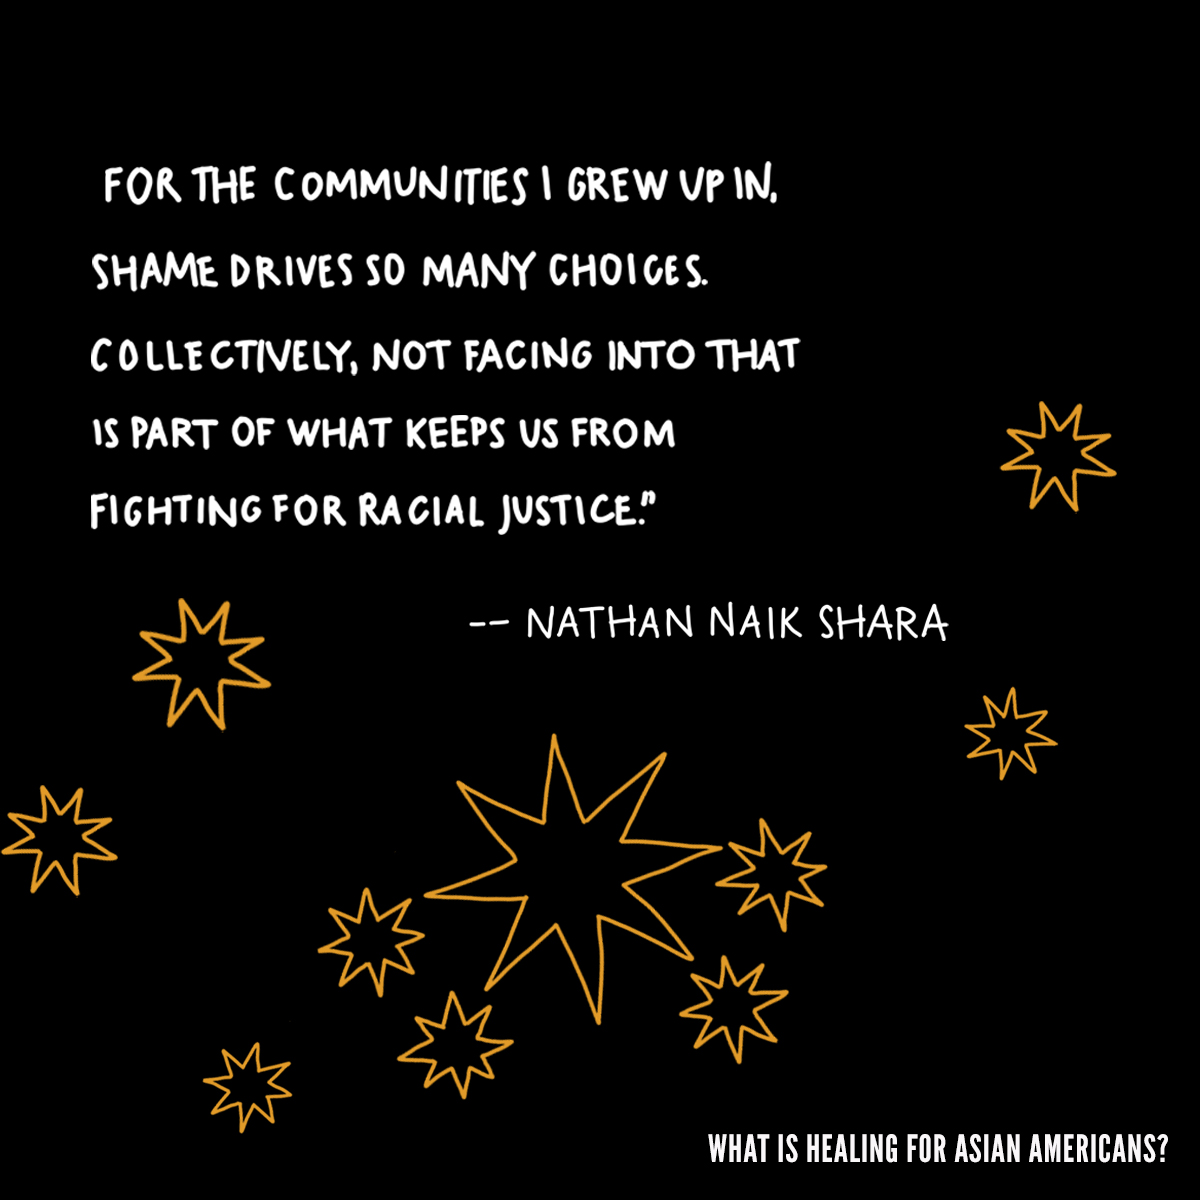 A black graphic of an affirmation card with a white text quote that reads, “For the communities I grew up in, shame drives so many choices. Collectively, not facing into that is part of what keeps us from fighting for racial justice. Nathan Naik Shara.” Below it are yellow icon drawings of stars.